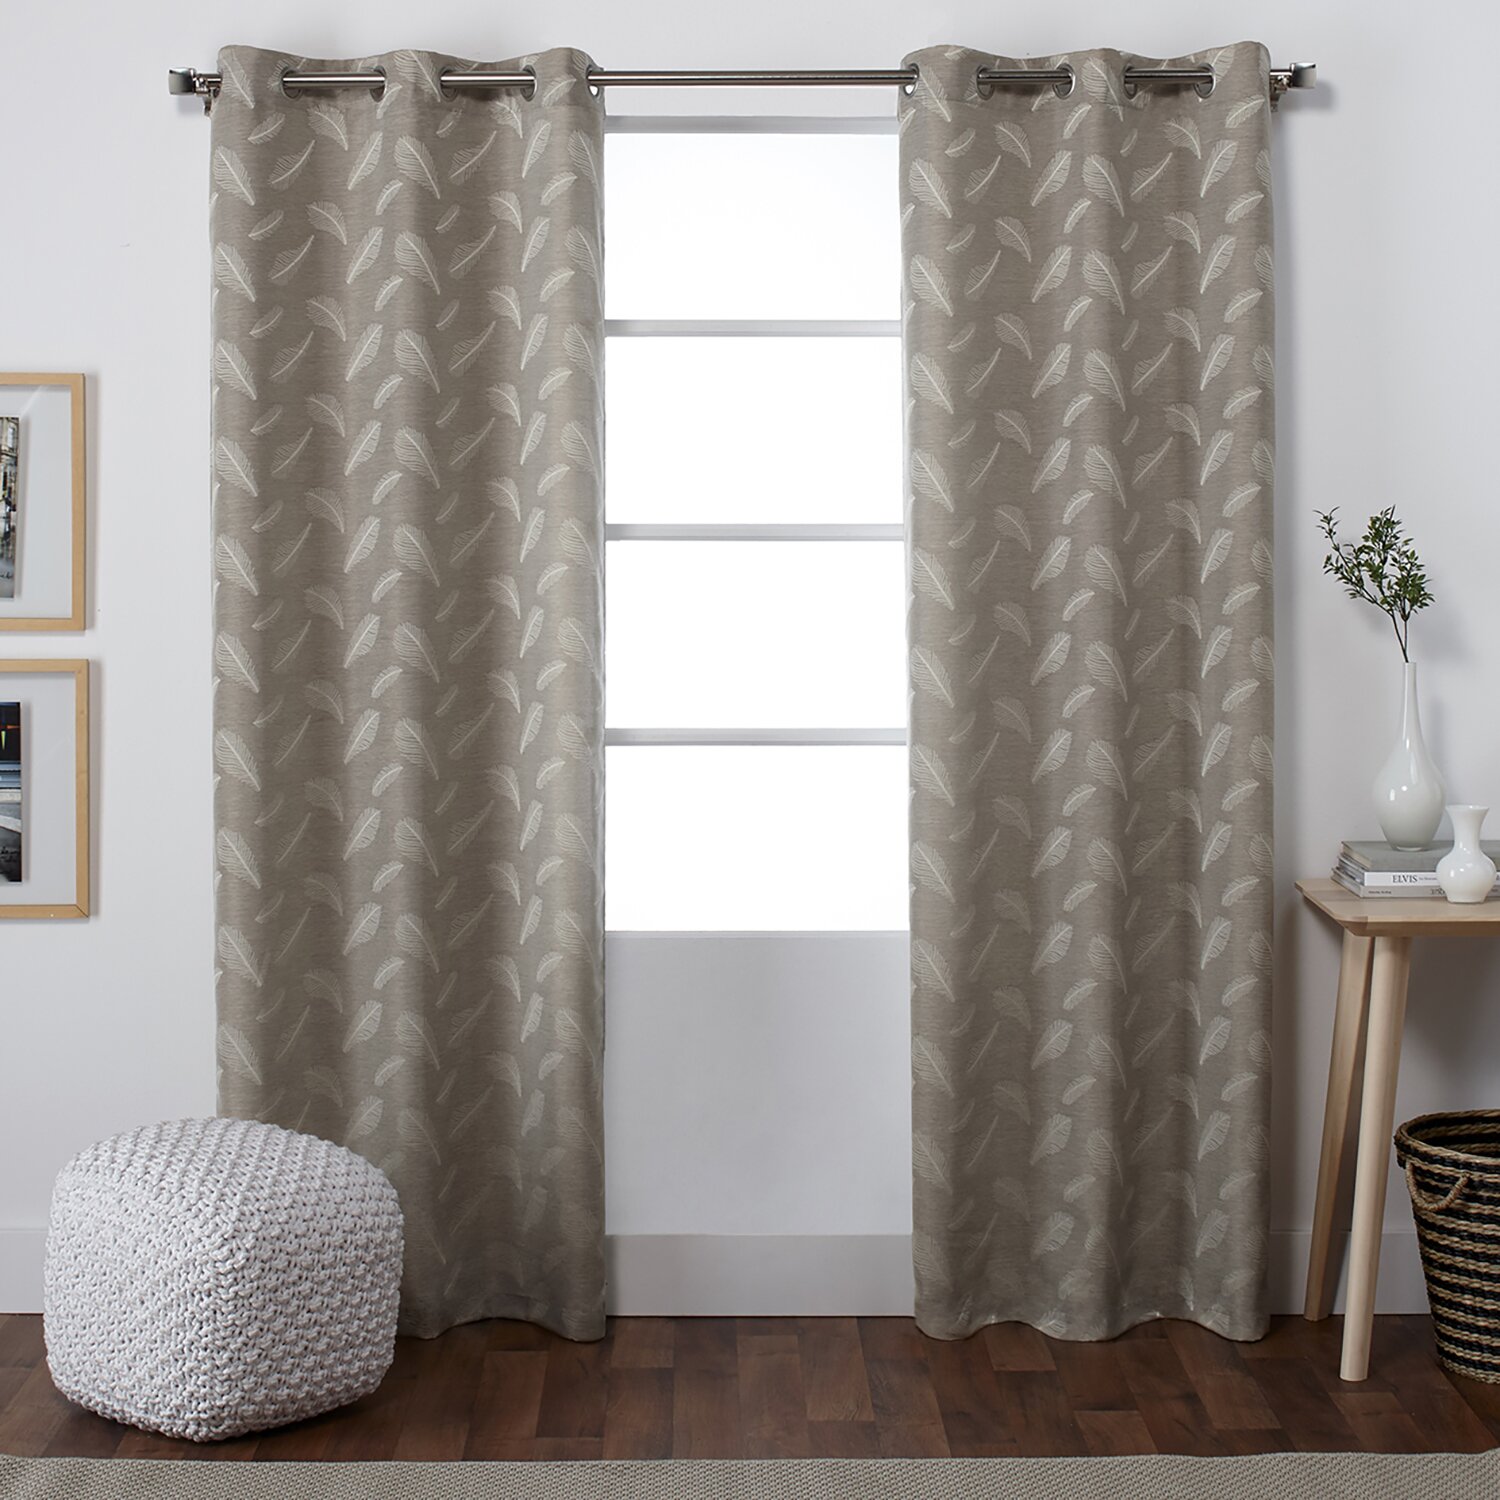 Laurel Foundry Modern Farmhouse Baillons Nature/Floral SemiSheer Grommet Curtain Panels 